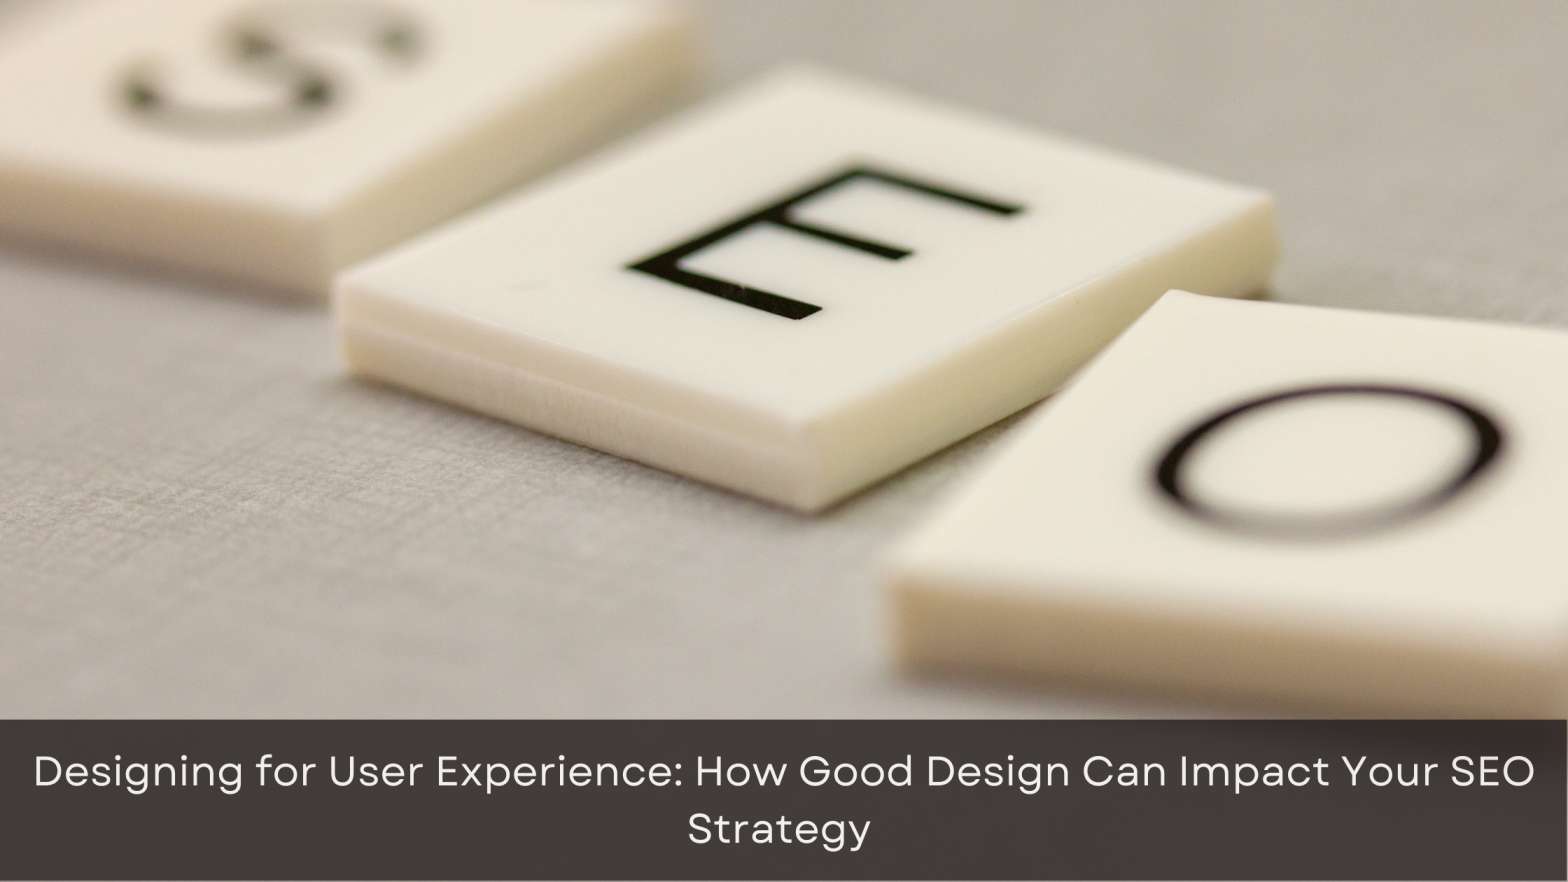 Designing for User Experience: How Good Design Can Impact Your SEO Strategy